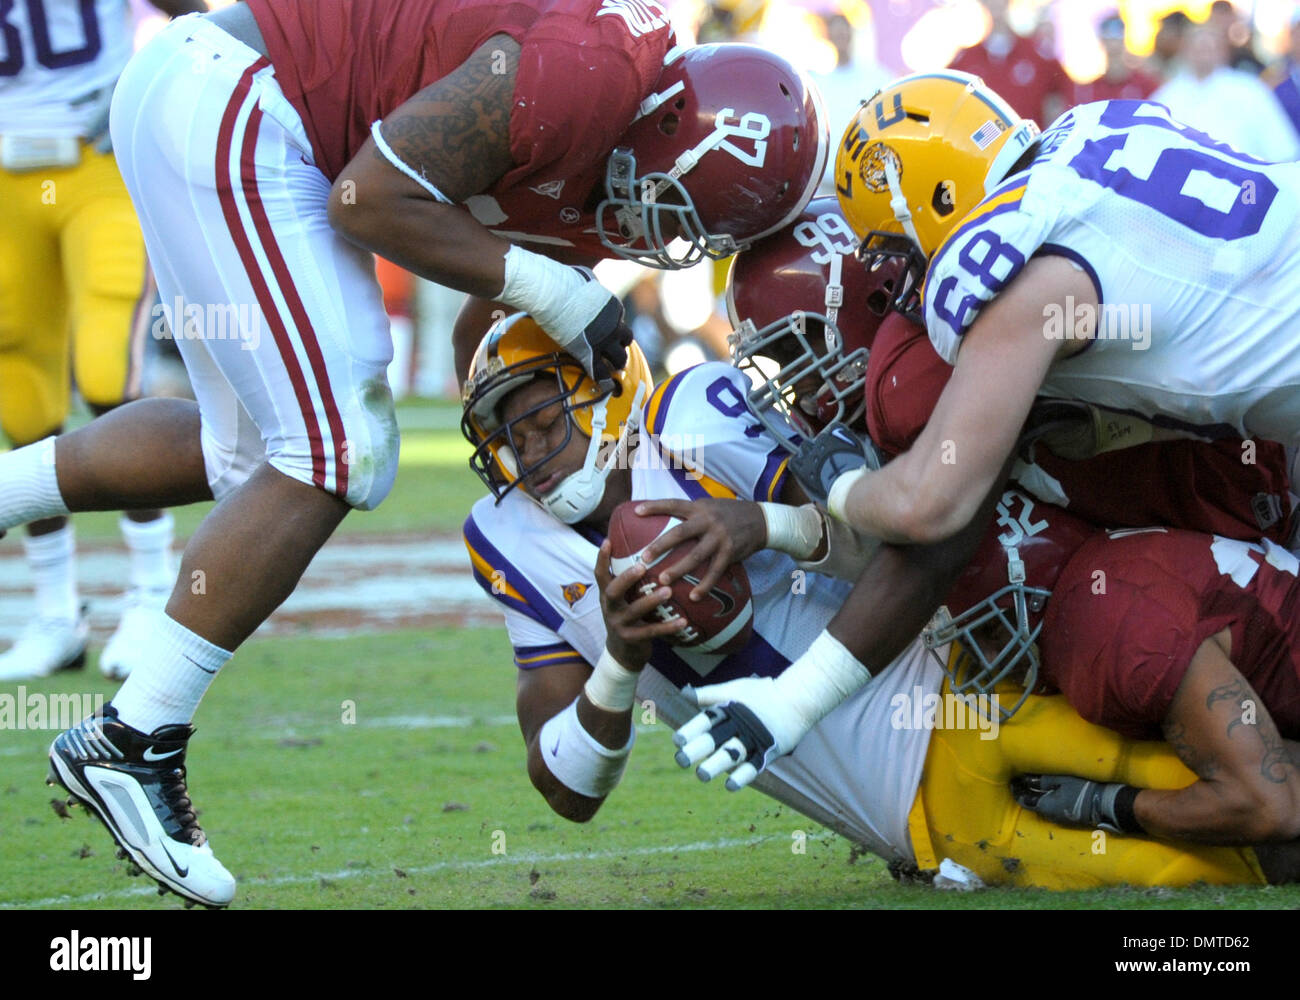 LSU quarterback, #9 Jordan Jefferson, is brought down hard during an SEC West matchup between #3 Alabama and #9 LSU.  The game is being held in Bryant .Denny Stadium in Tuscaloosa, Alabama.  Alabama would win the game 24-15. (Credit Image: © Stacy Revere/Southcreek Global/ZUMApress.com) Stock Photo